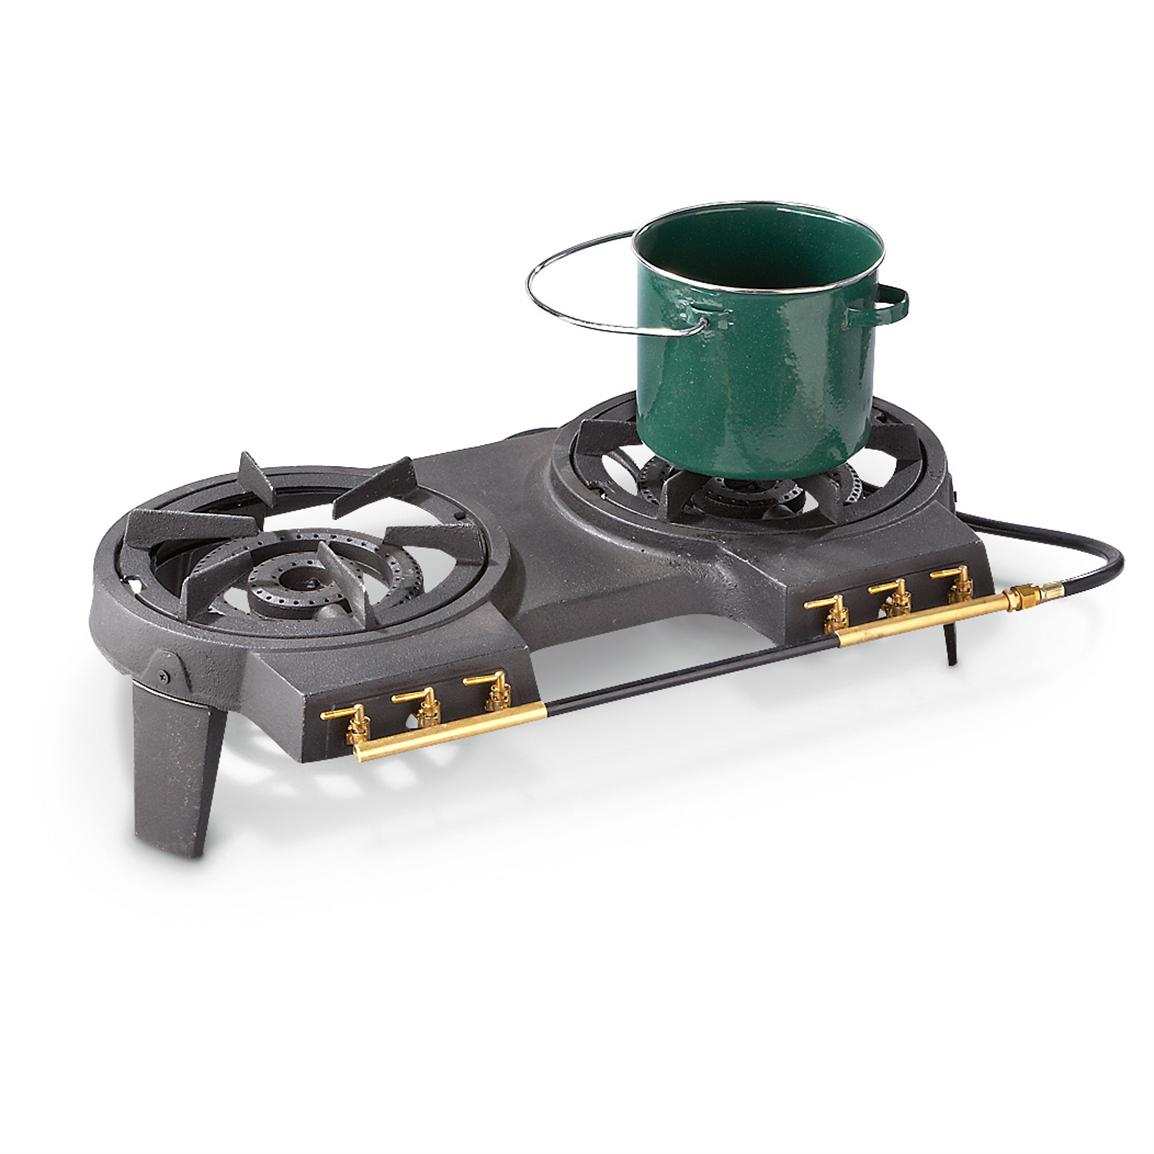  Two Burner Propane Camp Stove for Small Space